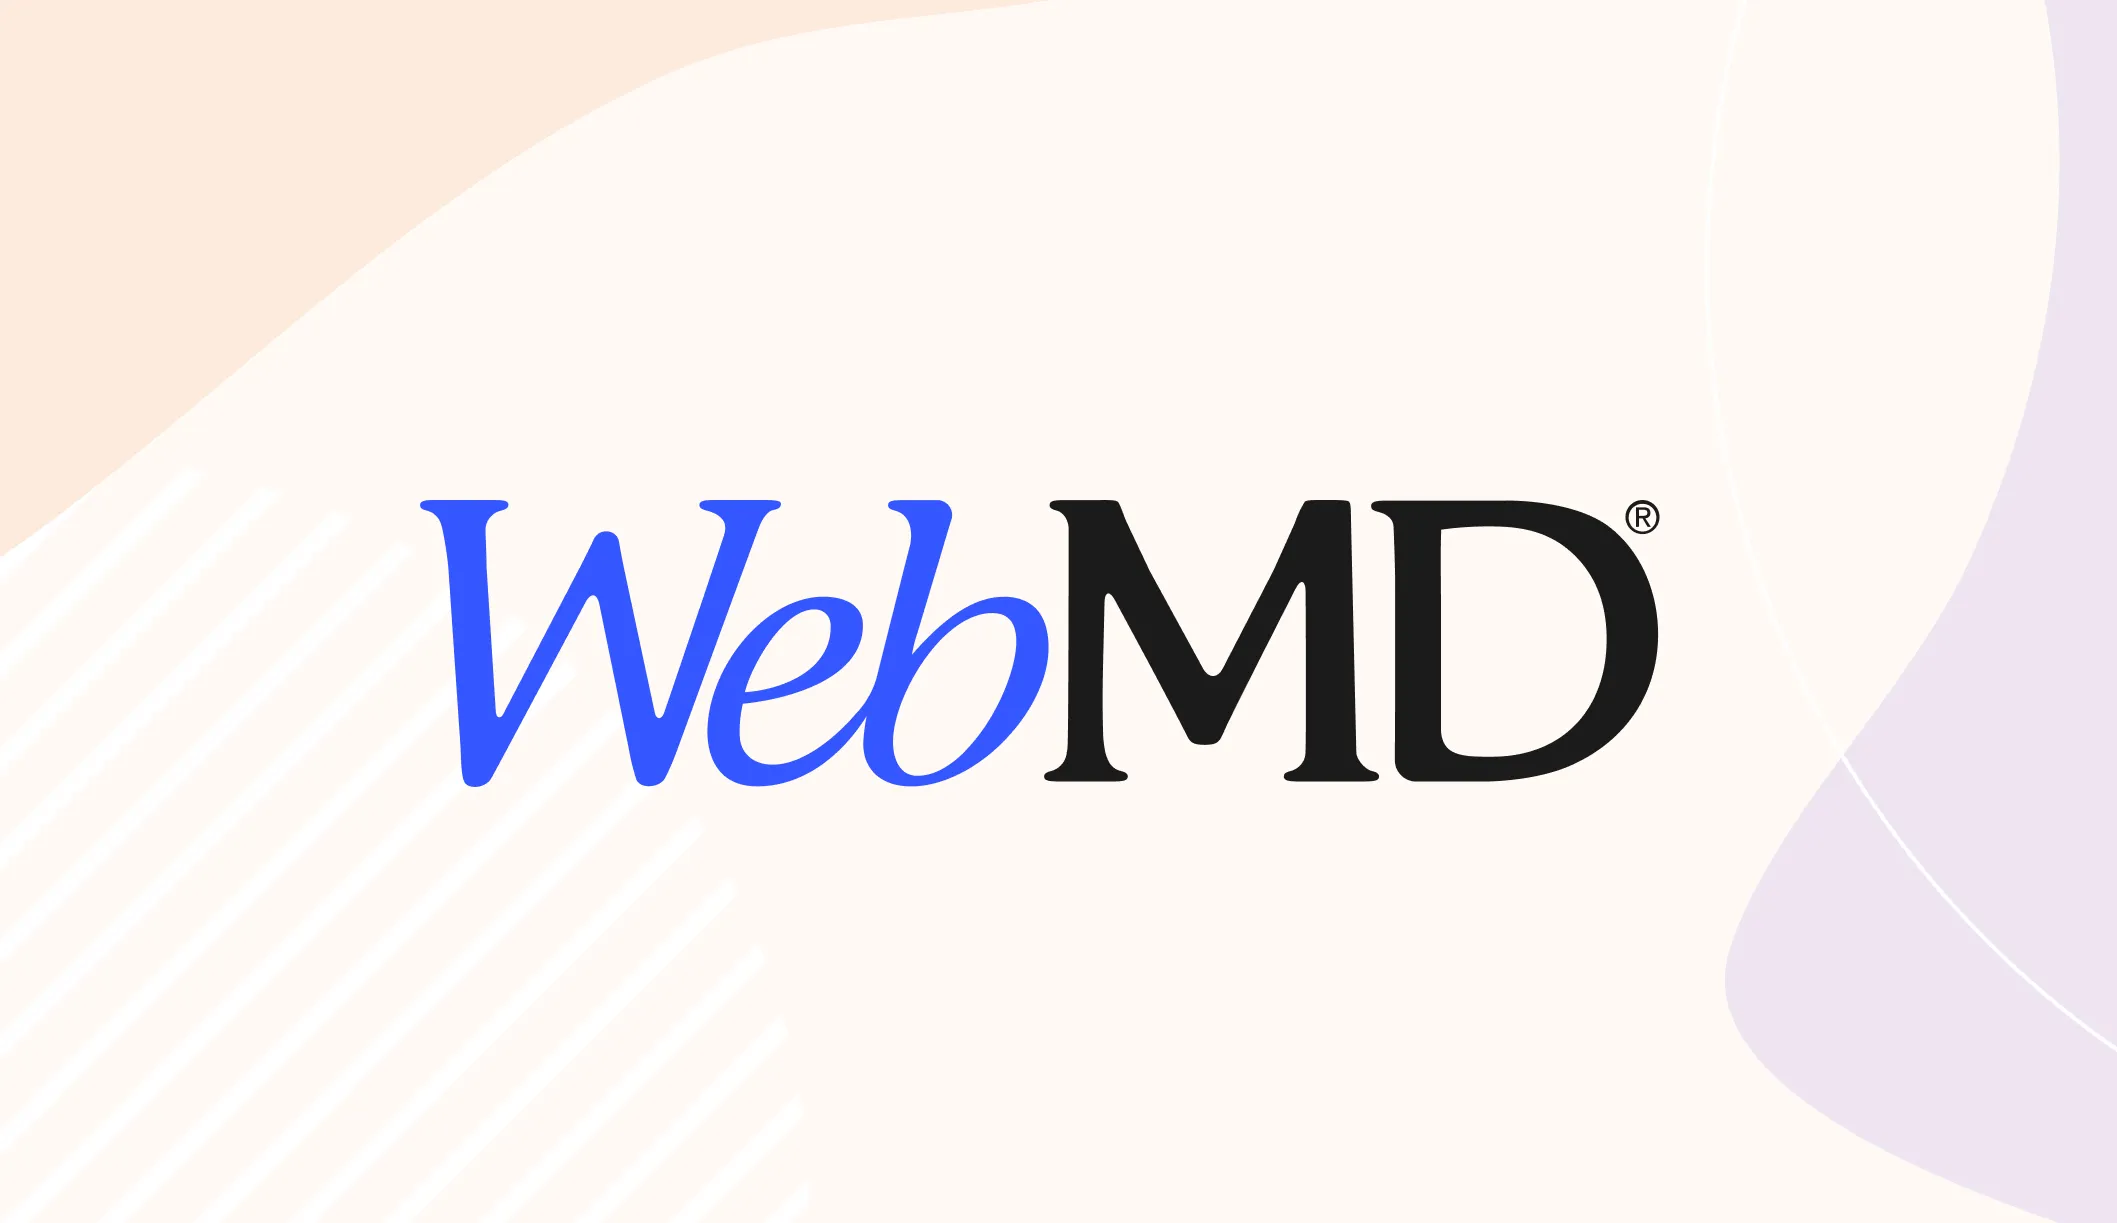 WebMD Common Health Topics A-Z - Find reliable health and medical information on common topics from A to Z